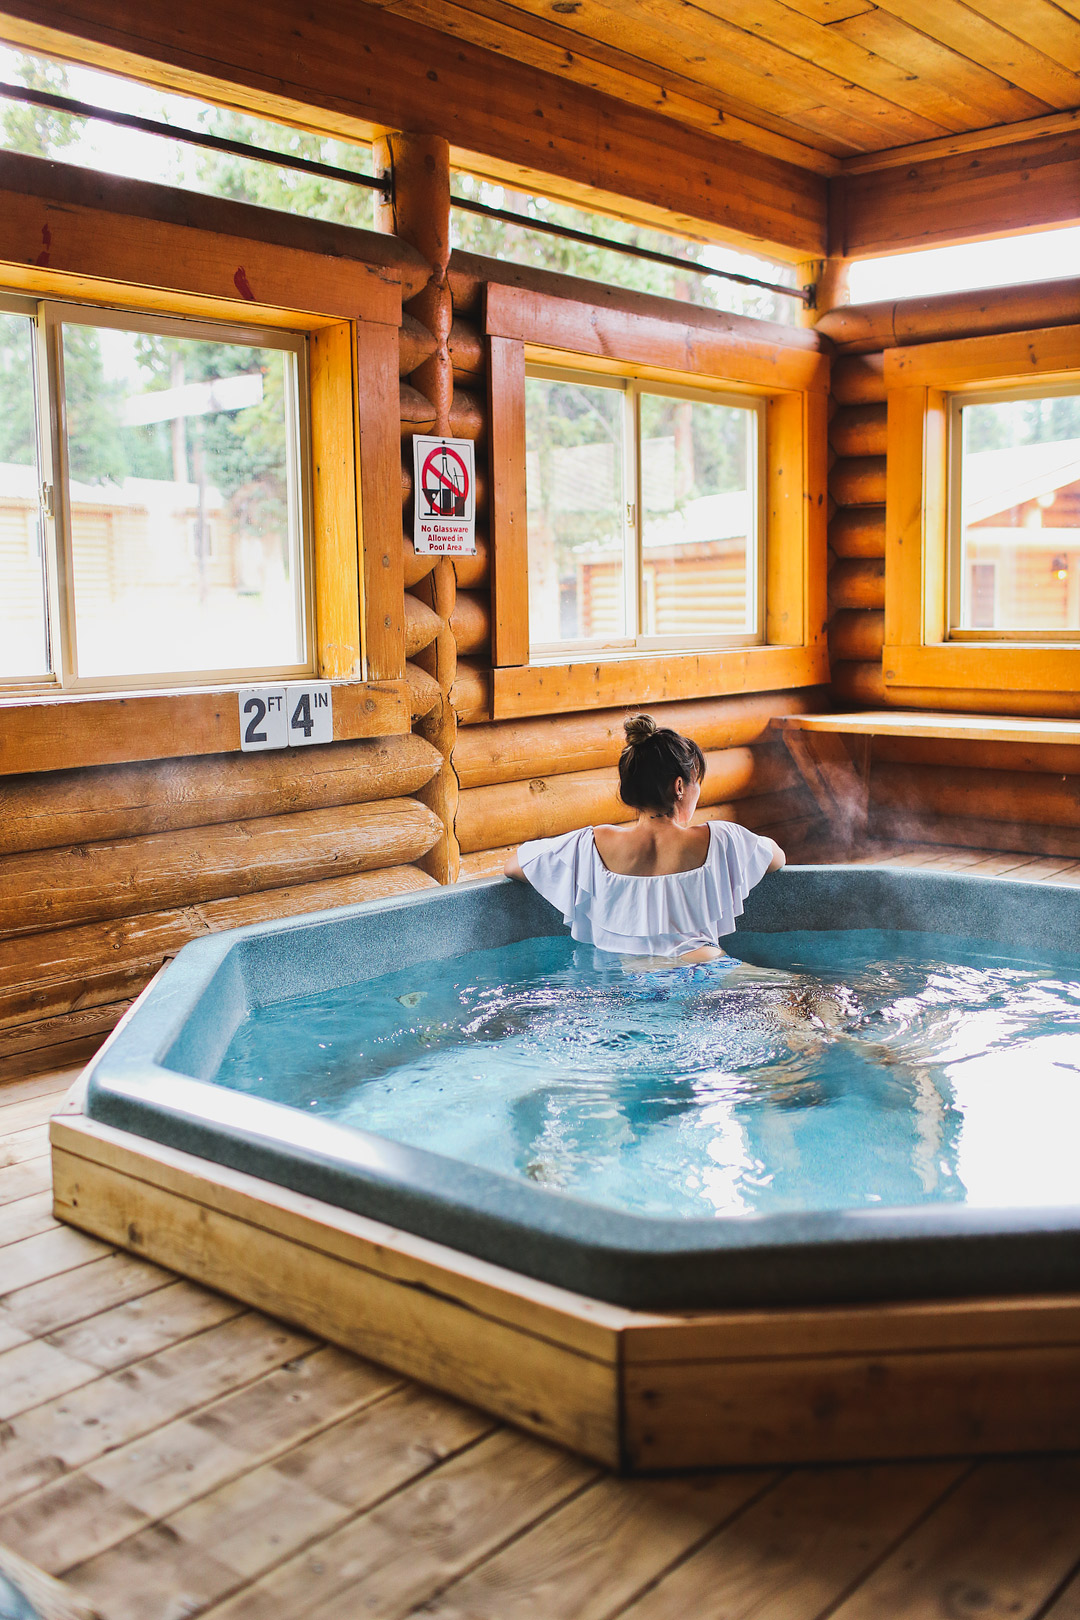 11 Best Things to Do in Jackson Hole + Togwotee Mountain Lodge + Where to Stay in Jackson Wyoming // Local Adventurer #thatswy #wyoming #wy #usa #travel #outdoors #hiking #adventure #togwotee #lodge